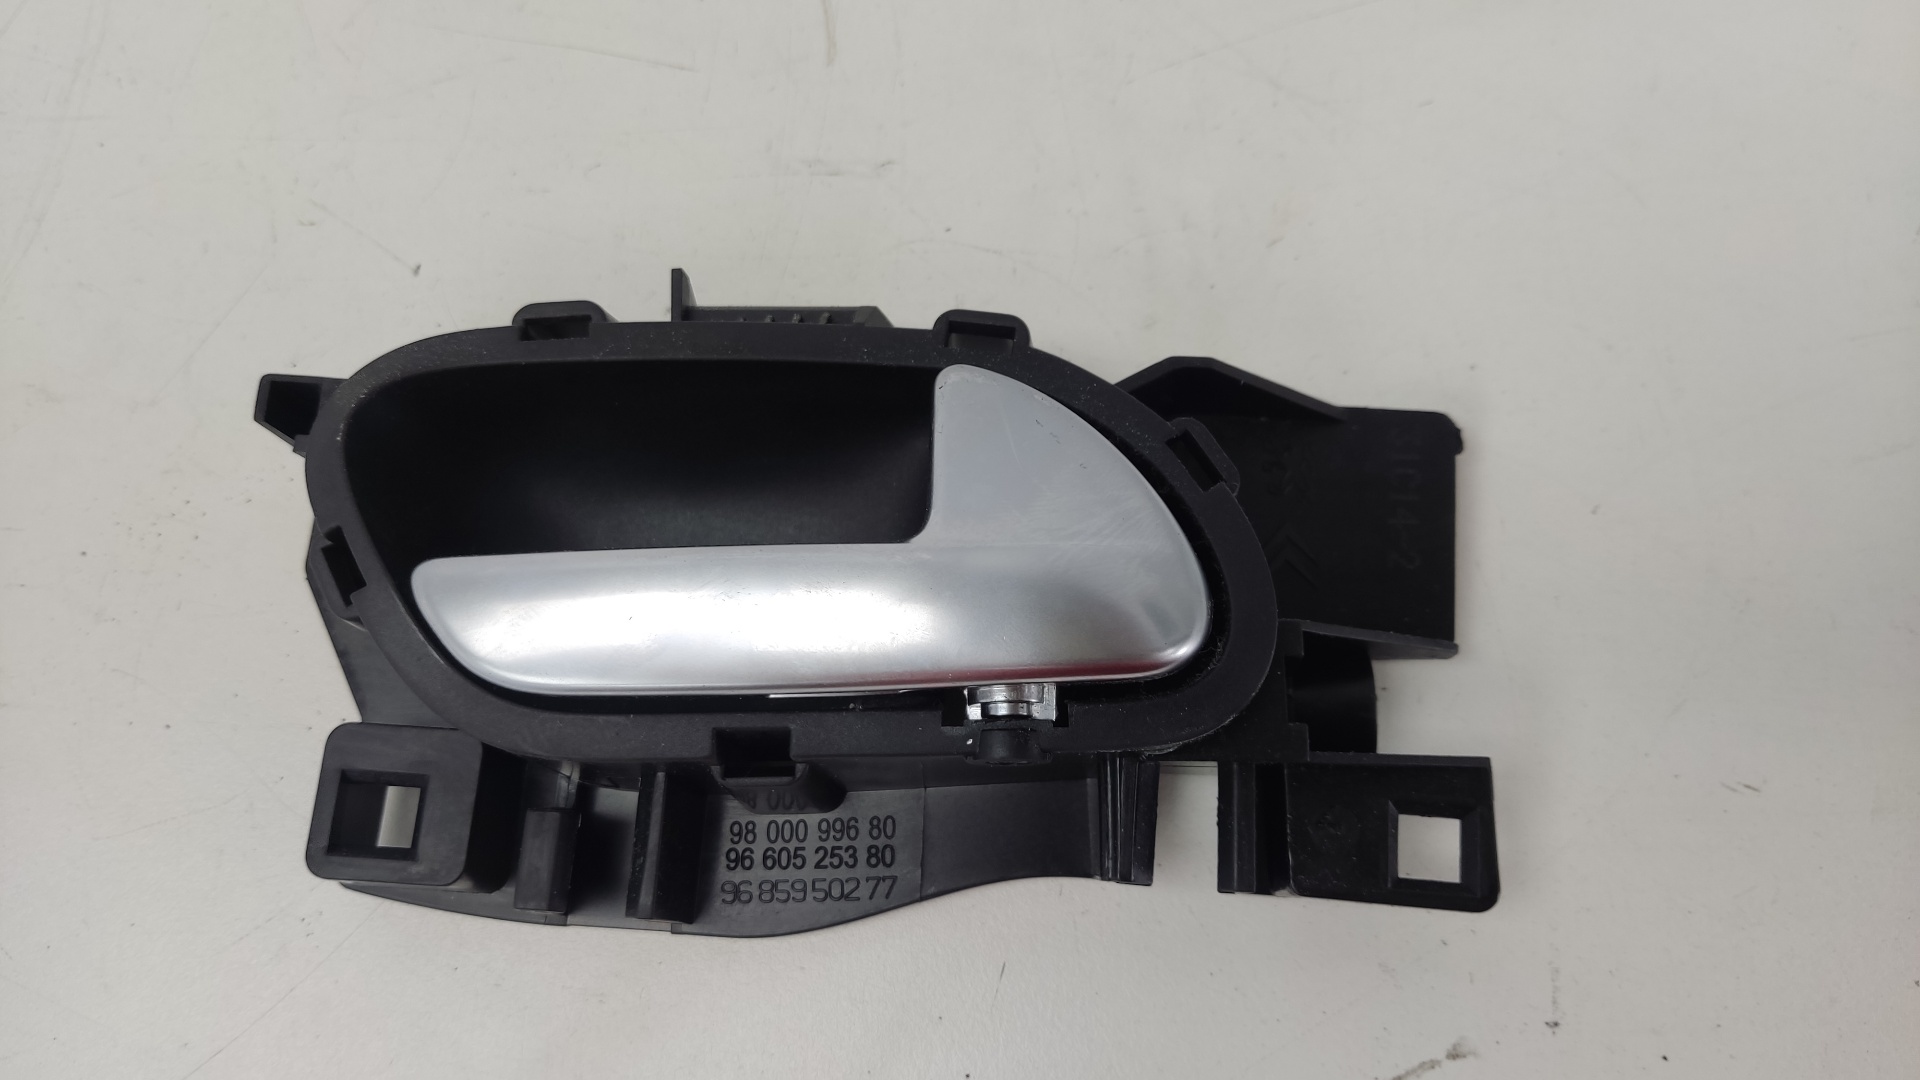 CITROËN C4 Picasso 2 generation (2013-2018) Right Rear Internal Opening Handle 9800099680, 9660525380, 9685950277 24582017